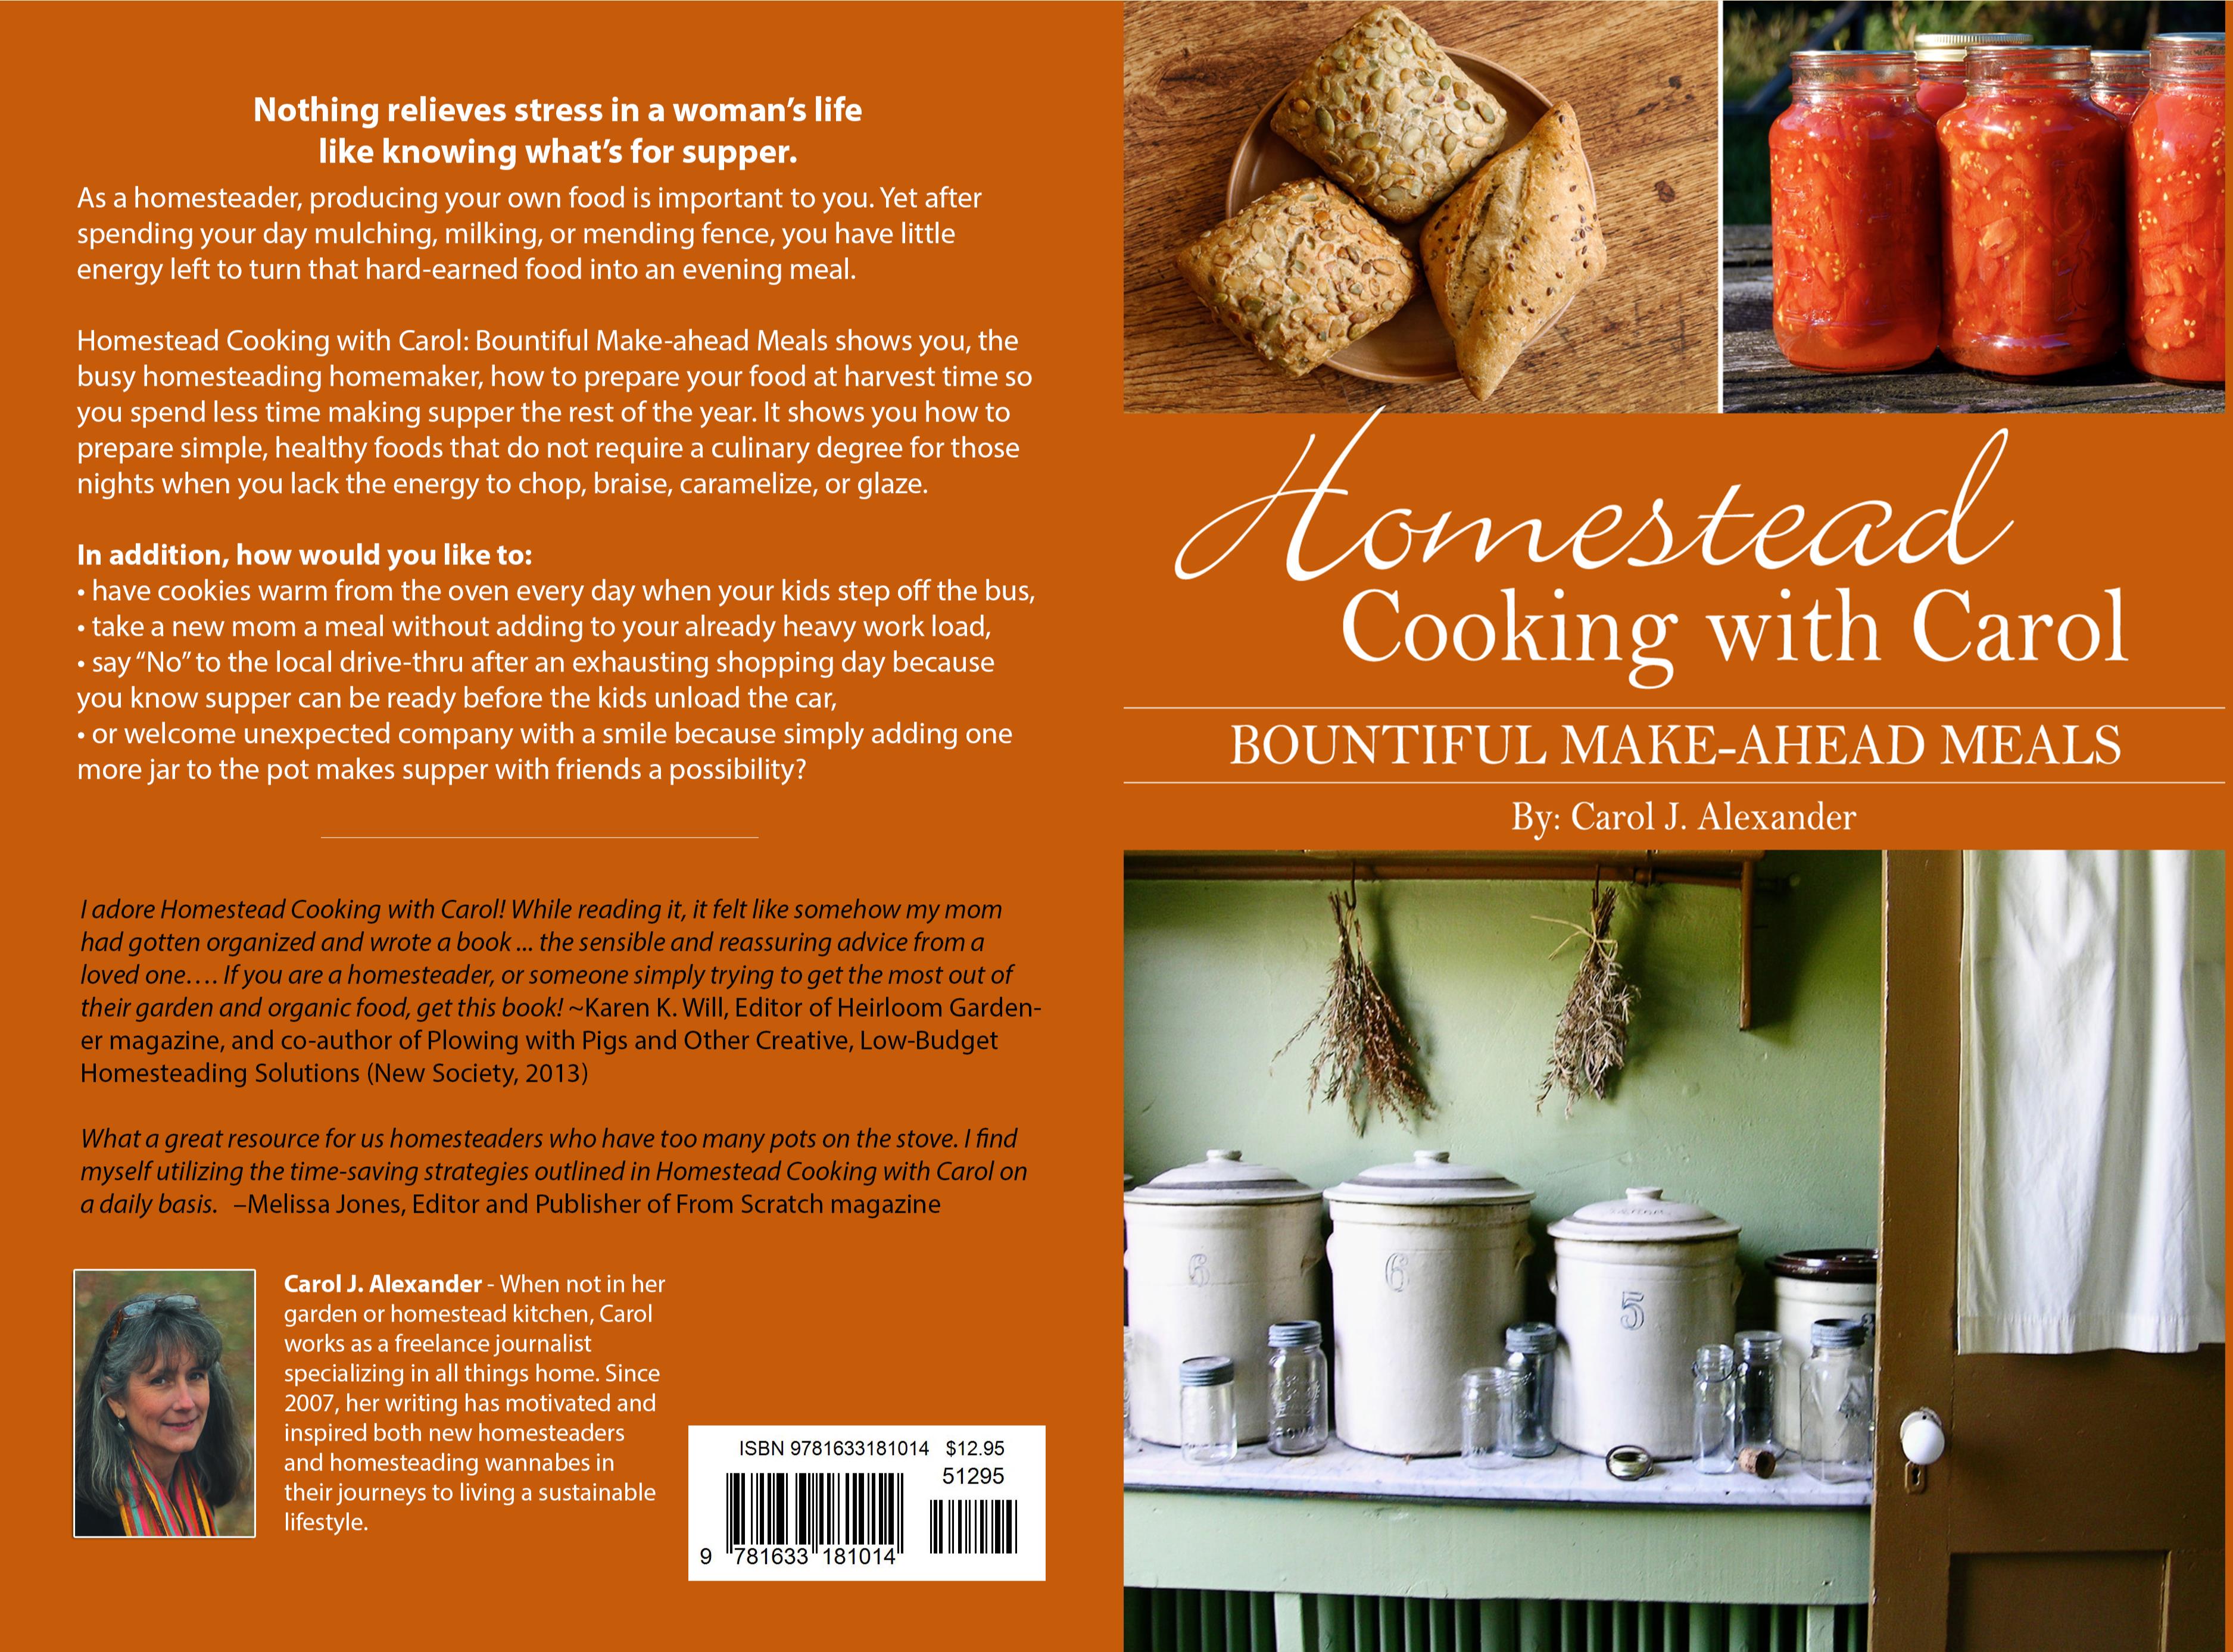 Homestead Cooking with Carol: Bountiful Make-ahead Meals cover image